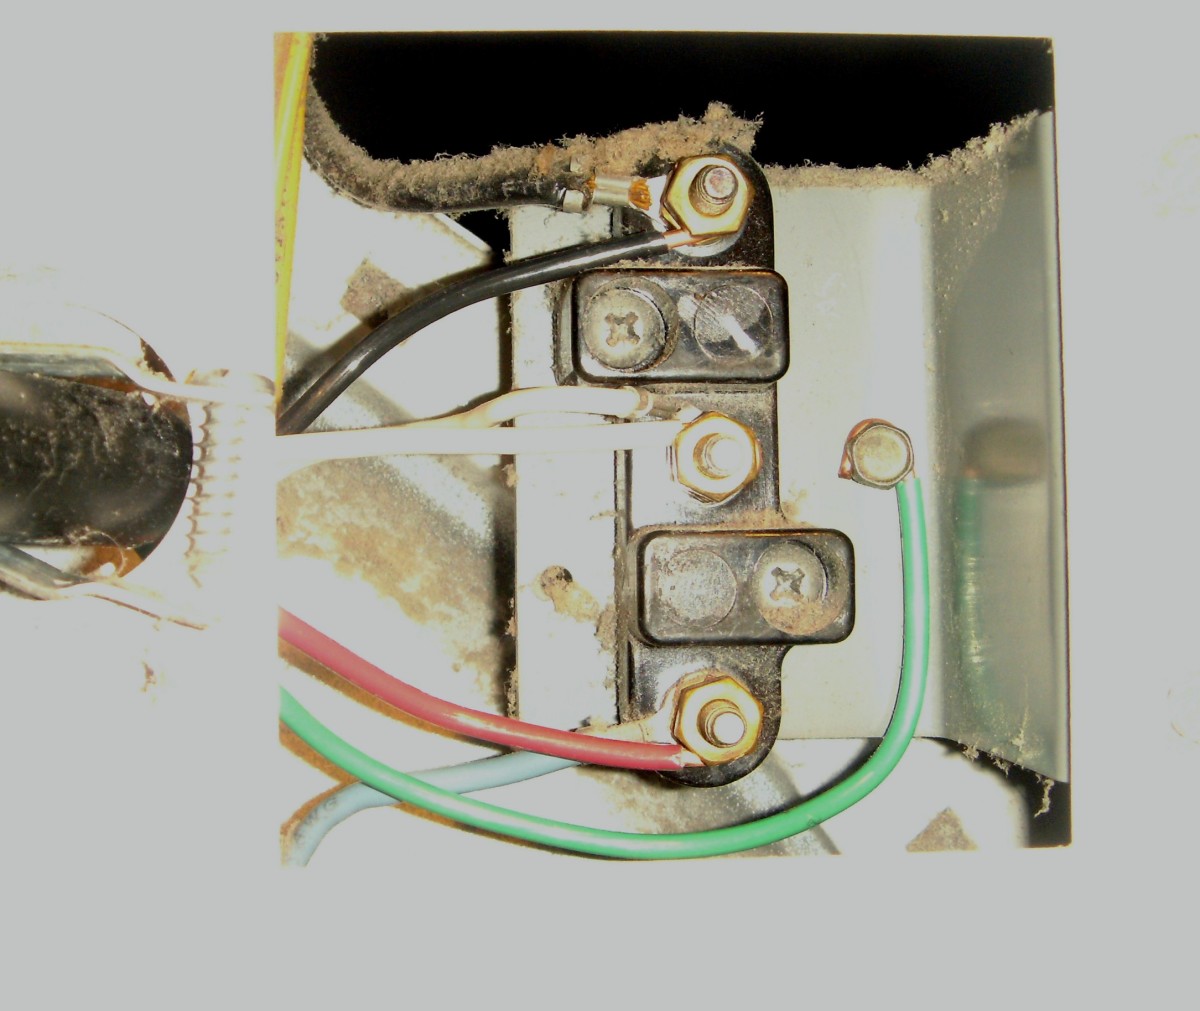 The four-pronged cord has been loosened from the dryer wall and is ready to be disconnected from the terminals.  Pay particular attention to where the white and green wires go.